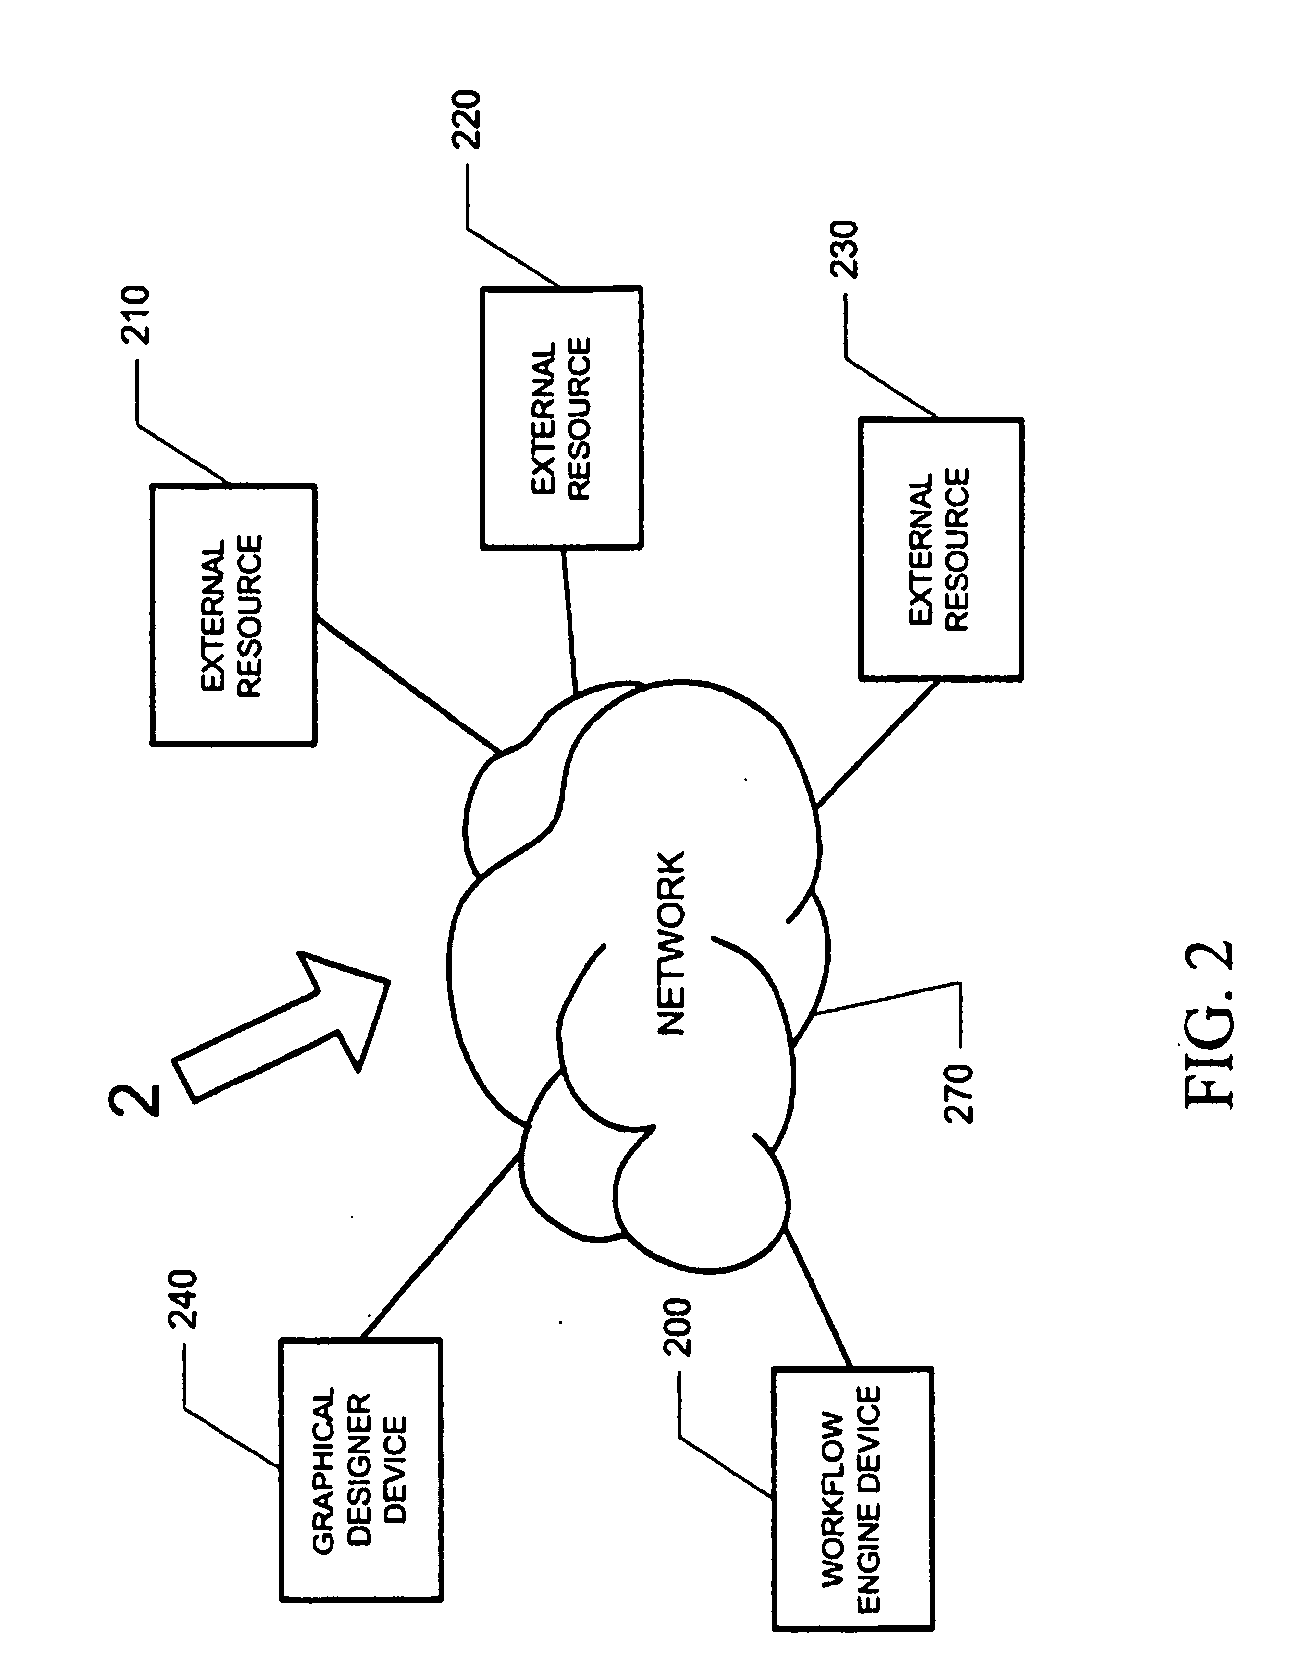 Systems and methods for generating source code for workflow platform